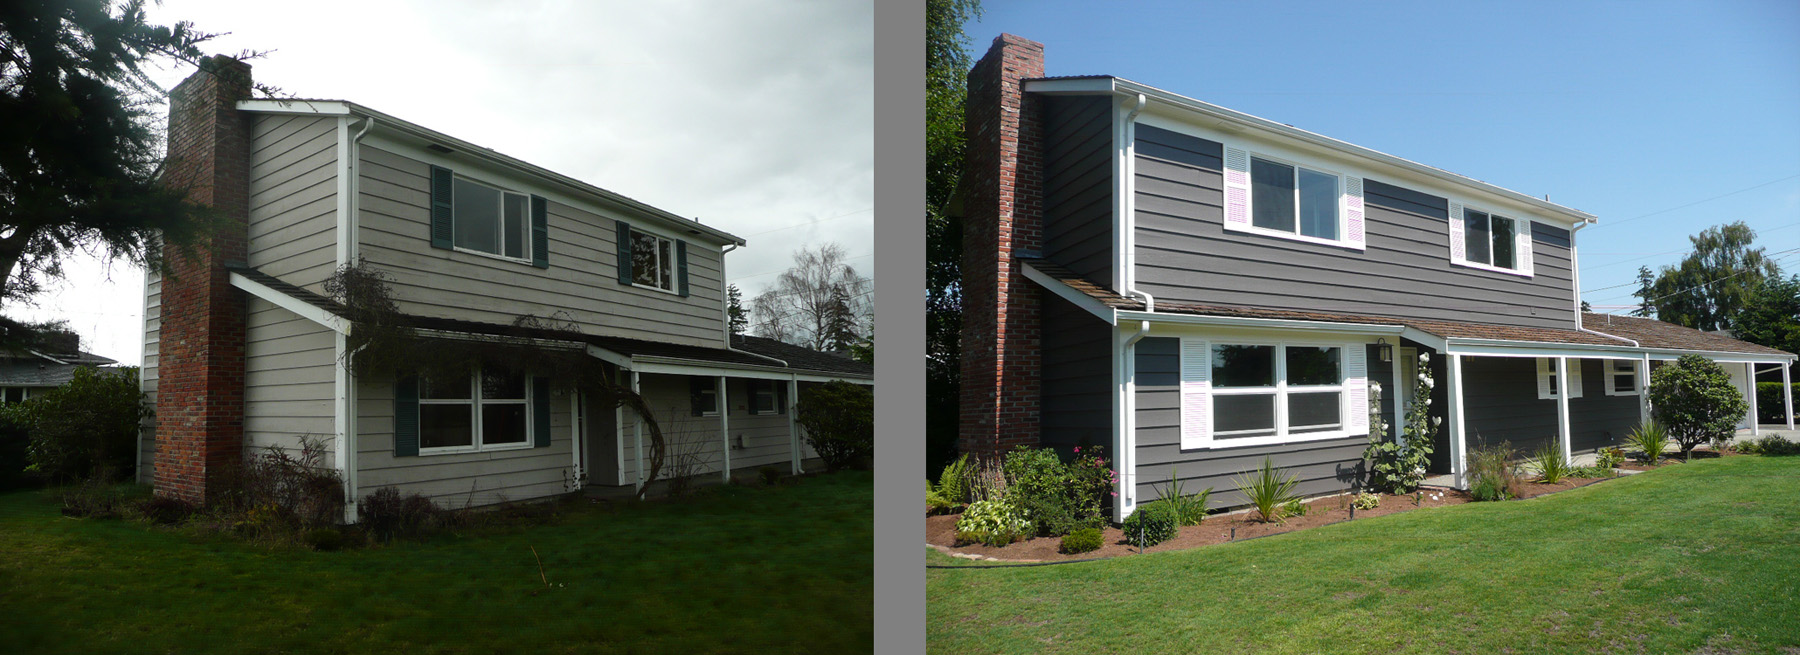 Before & after Home Renovation    